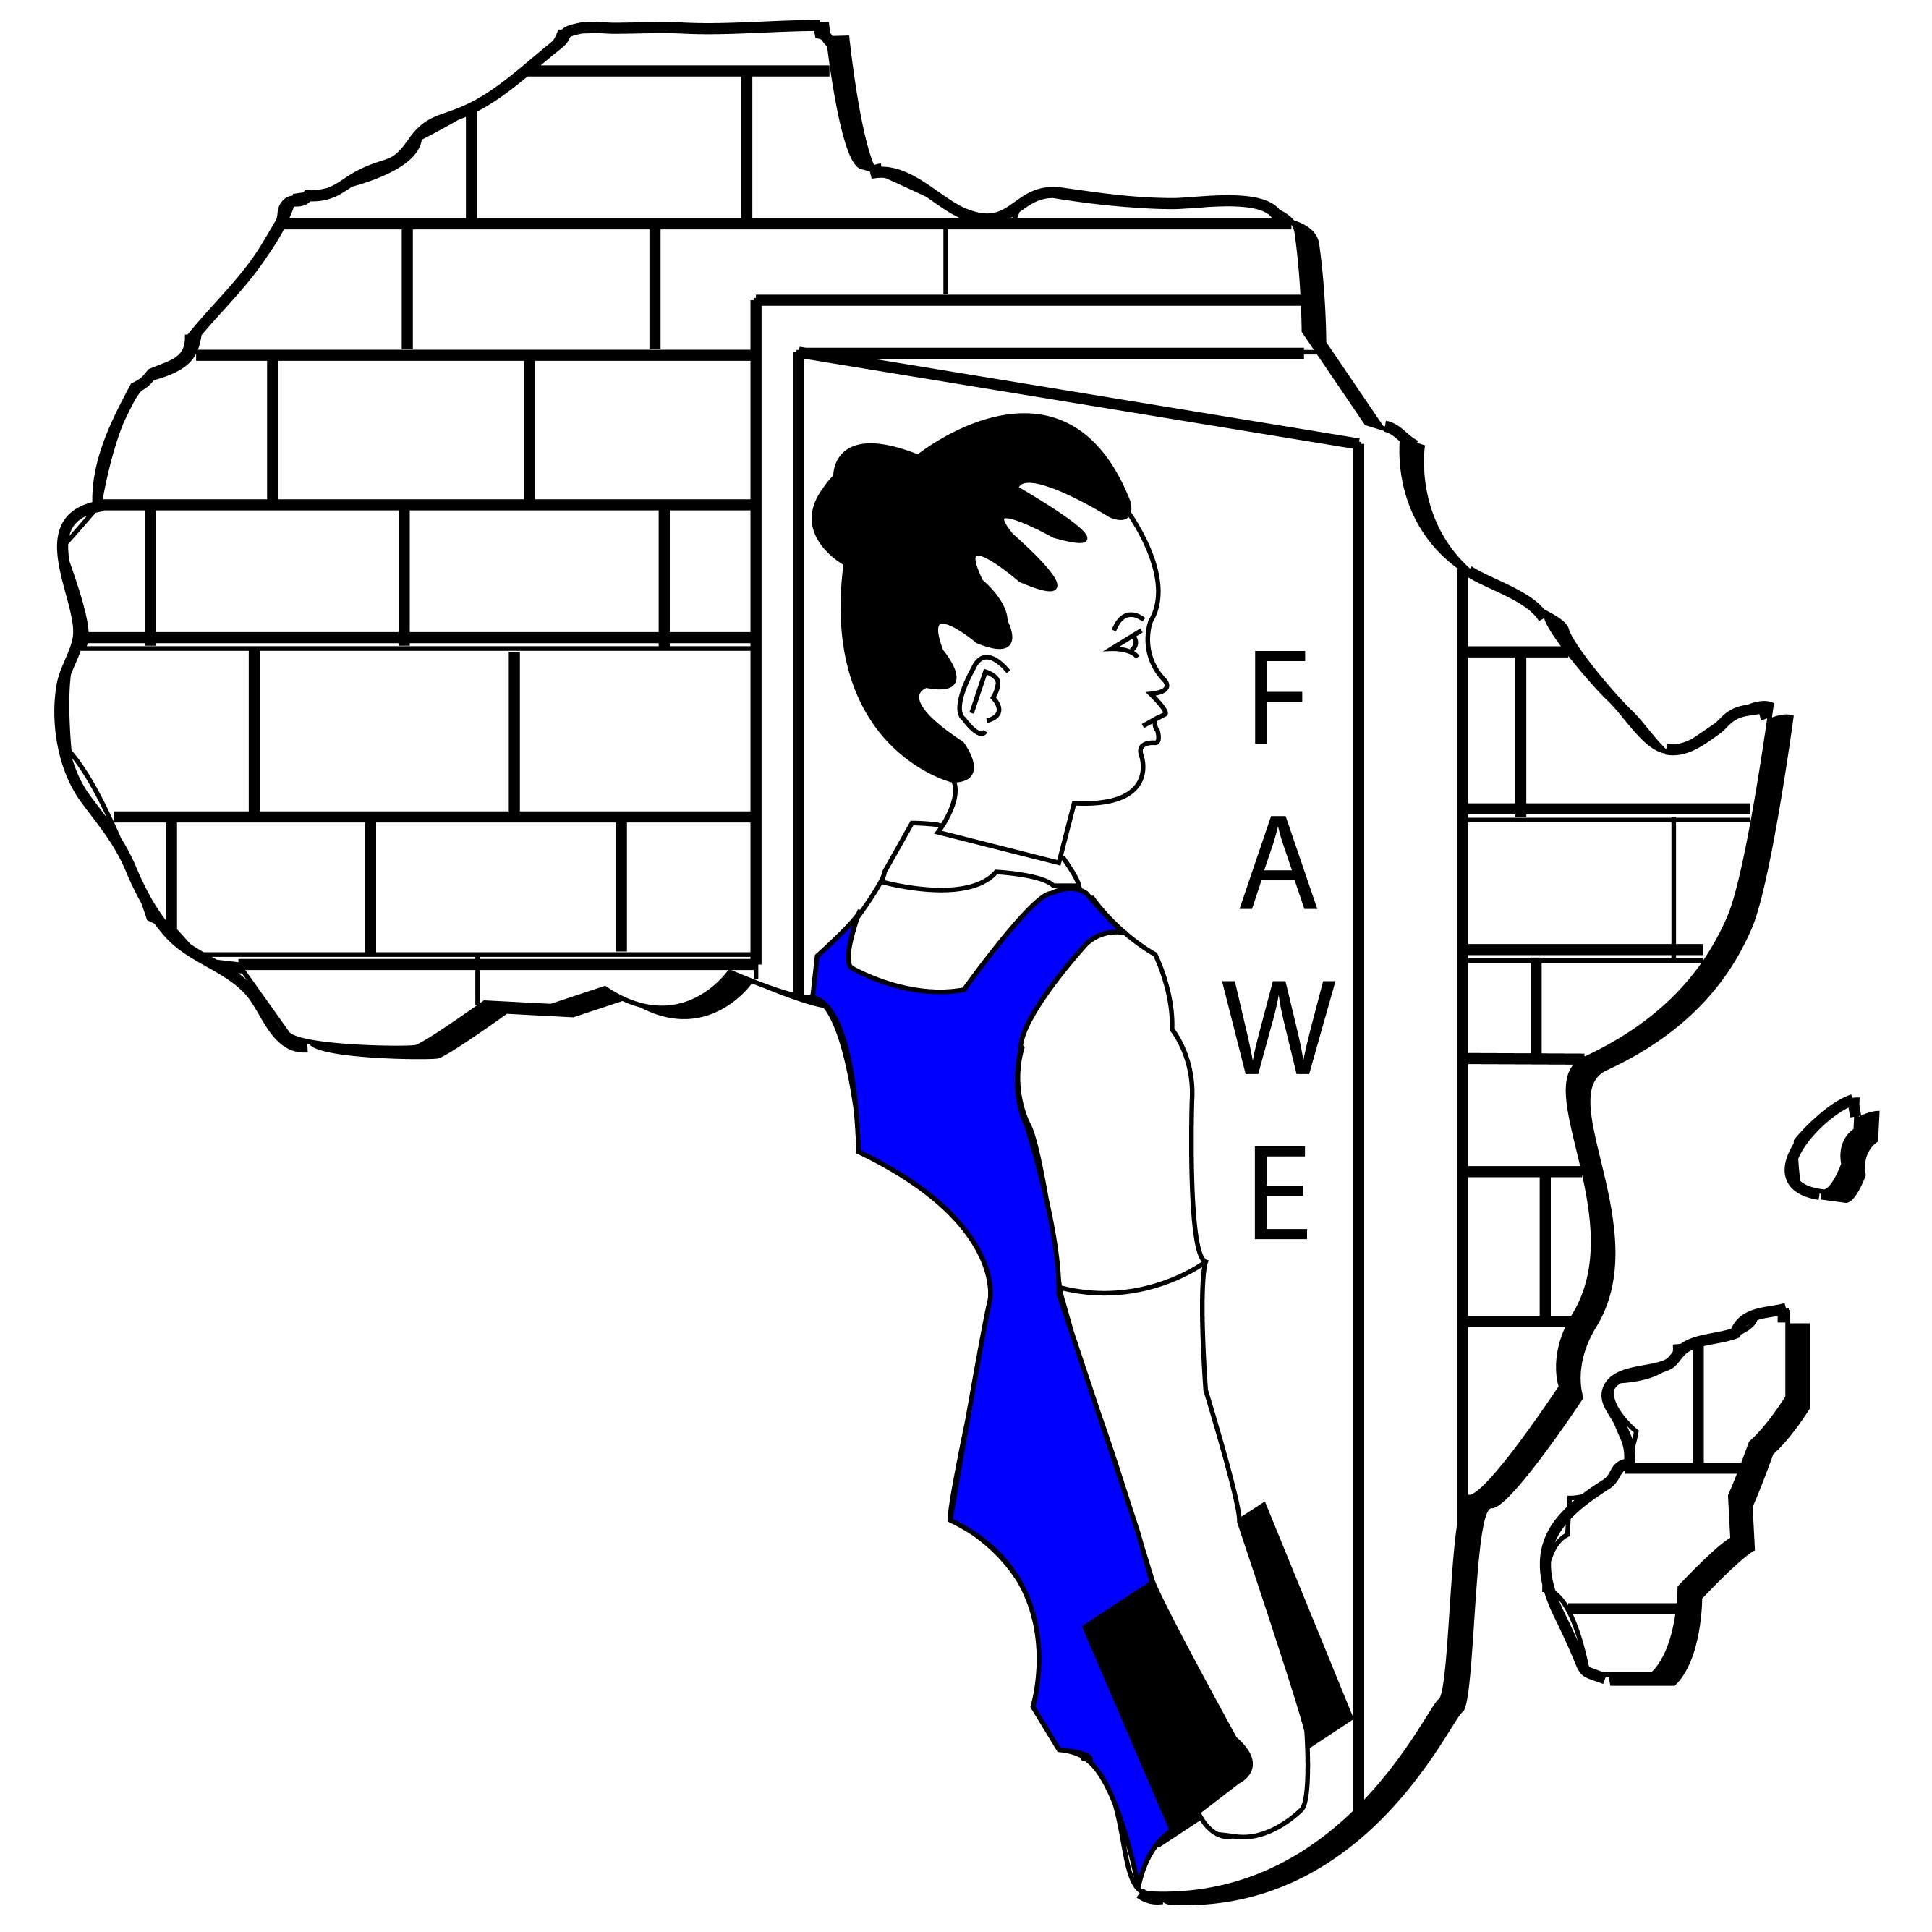 FAWE is the leading pan-African Non Governmental Organisation working to empower girls and women through gender-responsive education in sub-Saharan Africa.